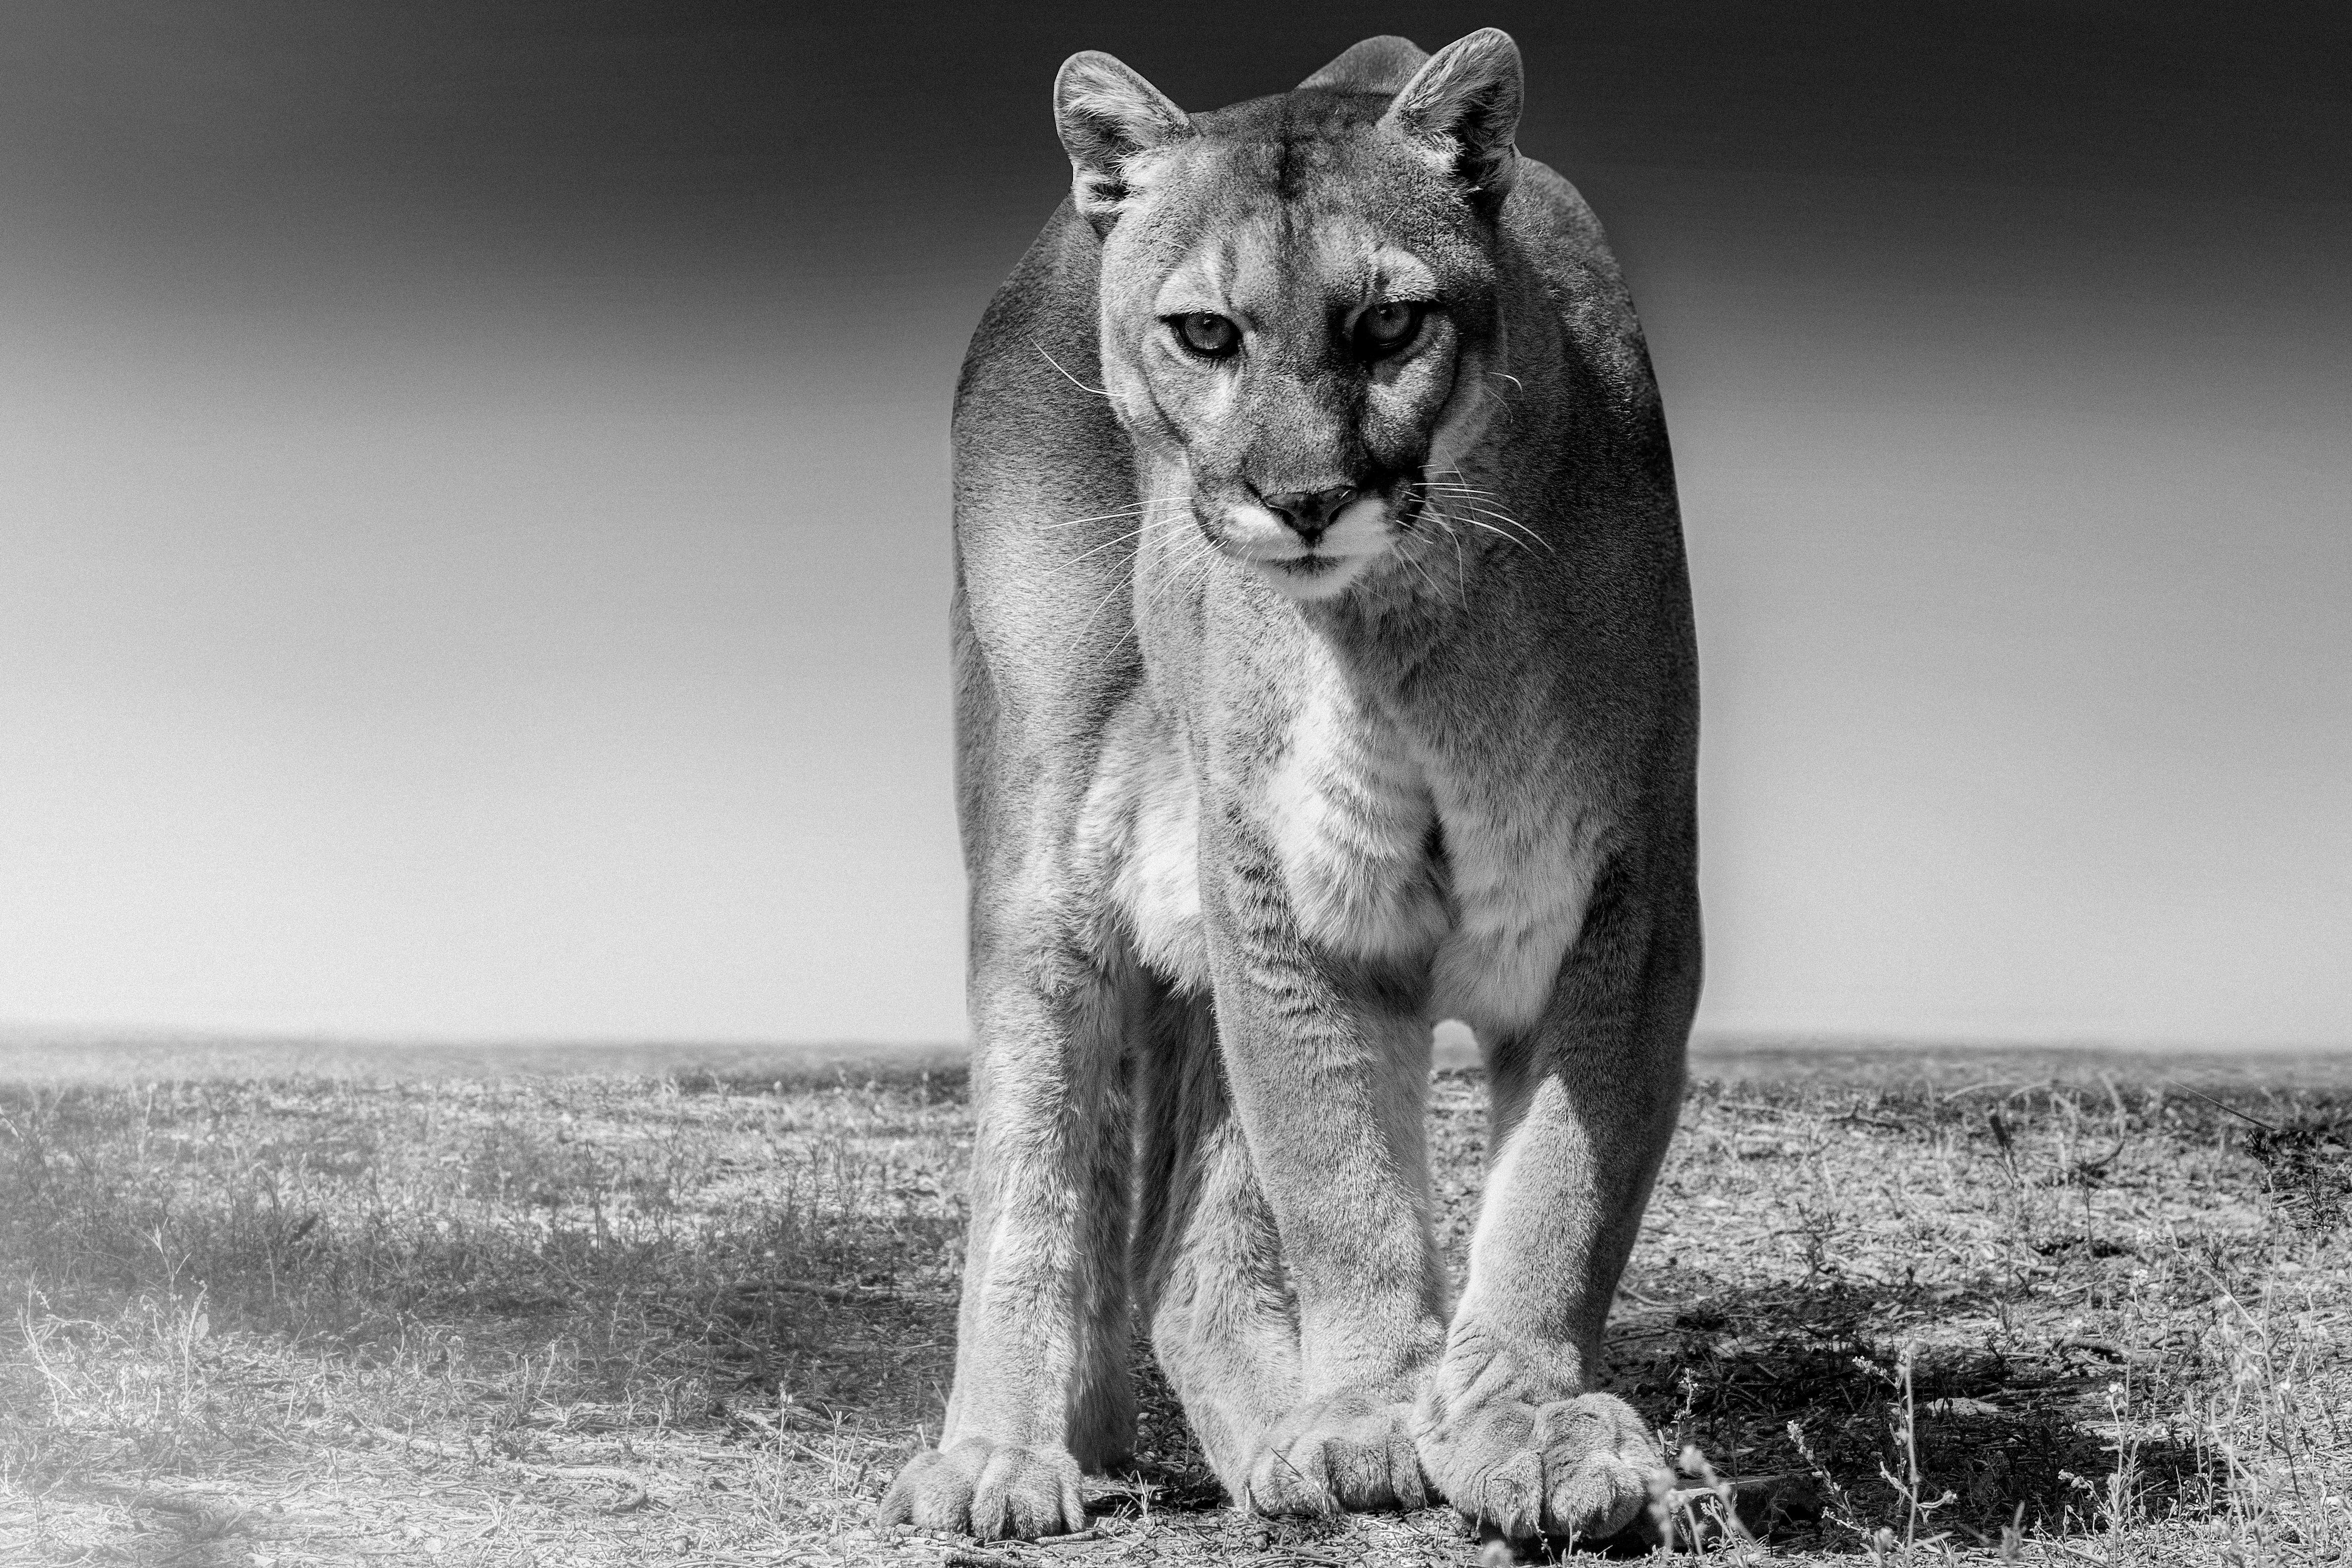 Shane Russeck Black and White Photograph - Cougar Print 60x40 - Fine Art Photography of Mountain Lion